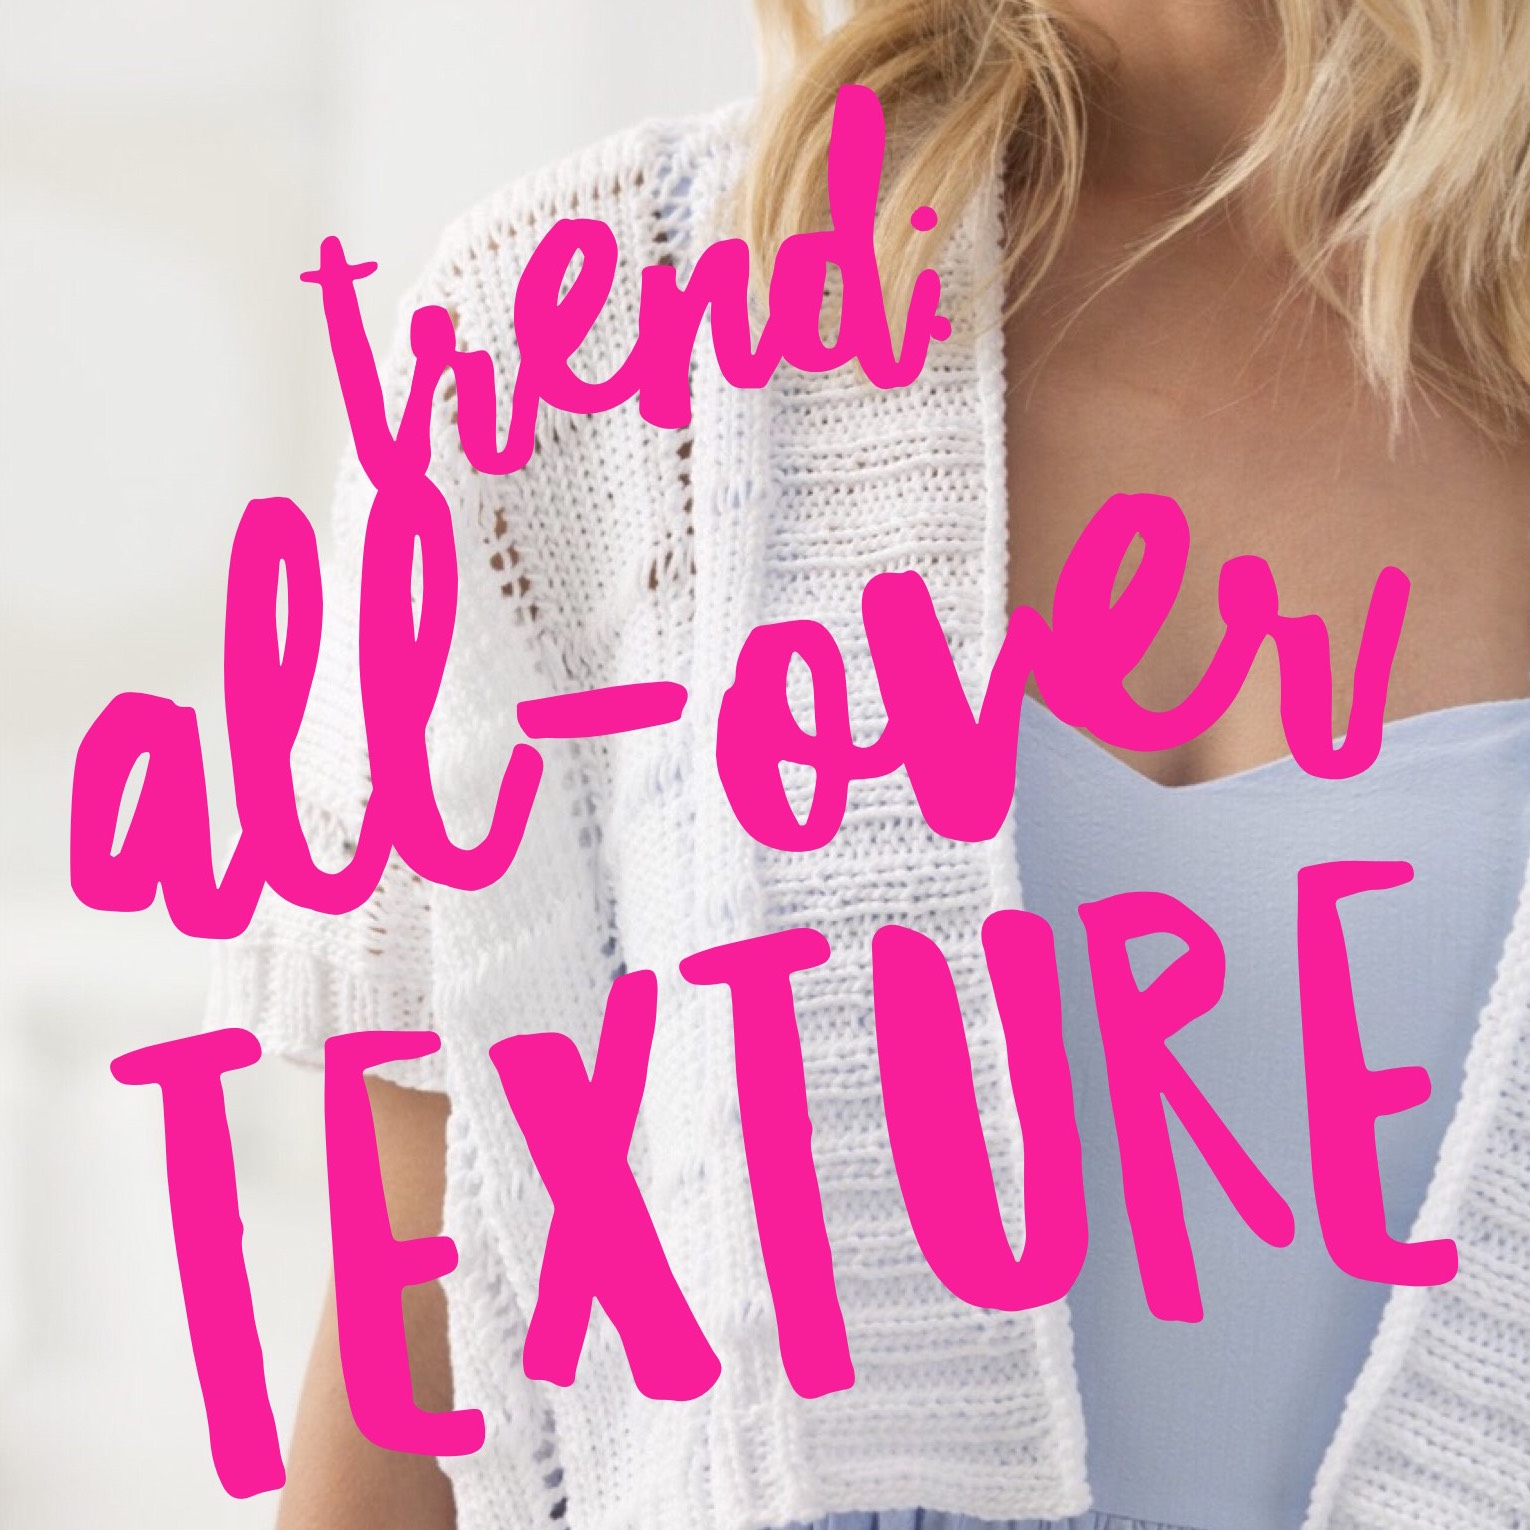 2018 Trends: All-Over Texture, +15 Patterns